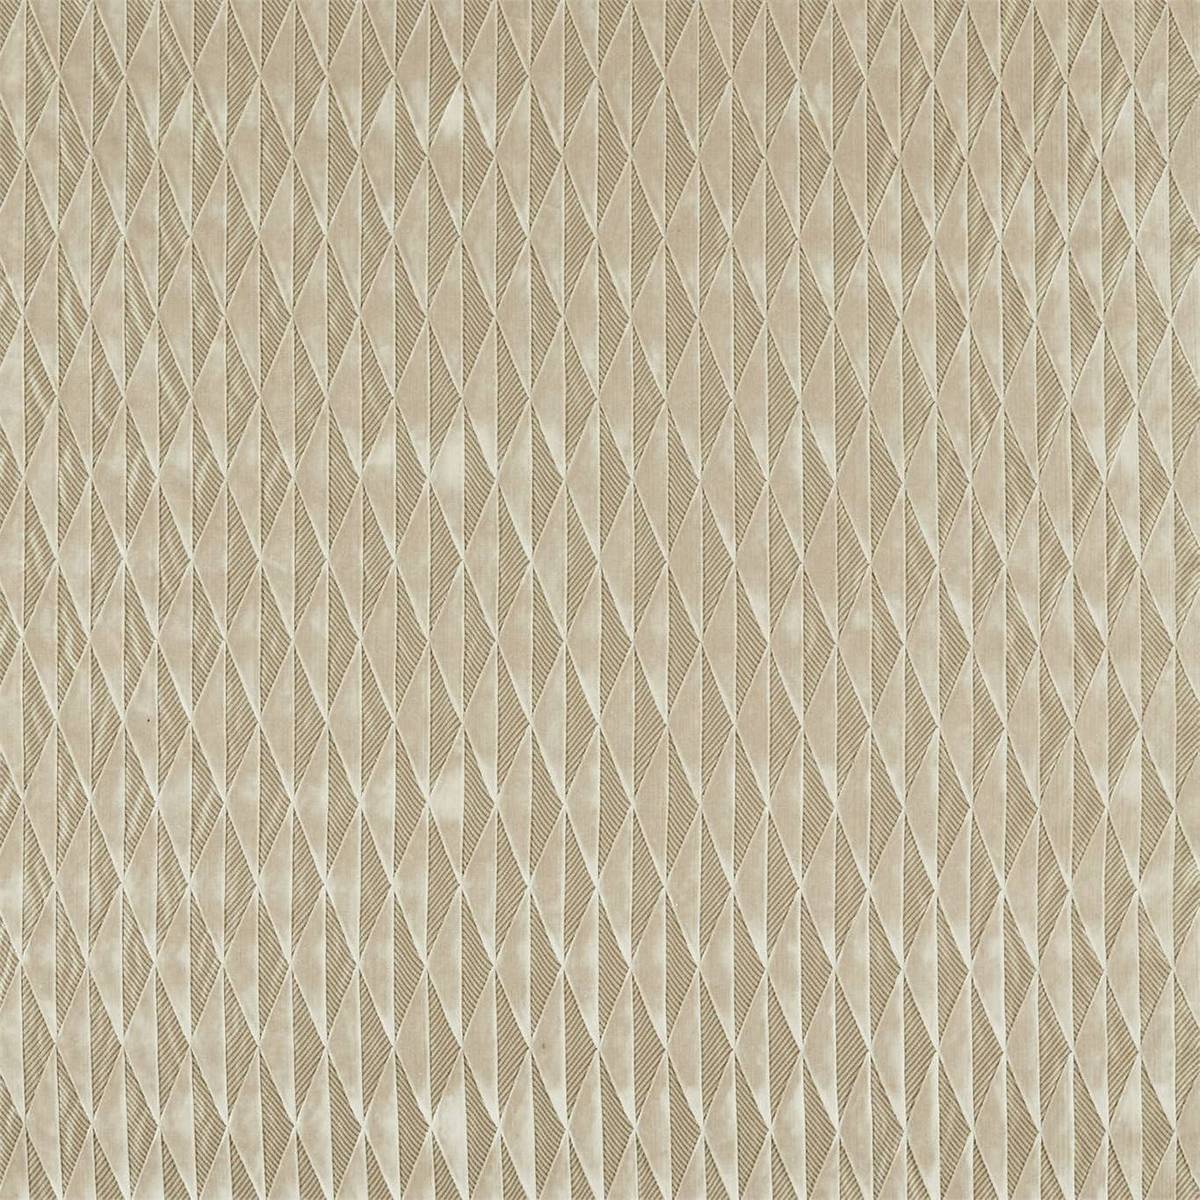 Irradiant Linen Fabric by Harlequin